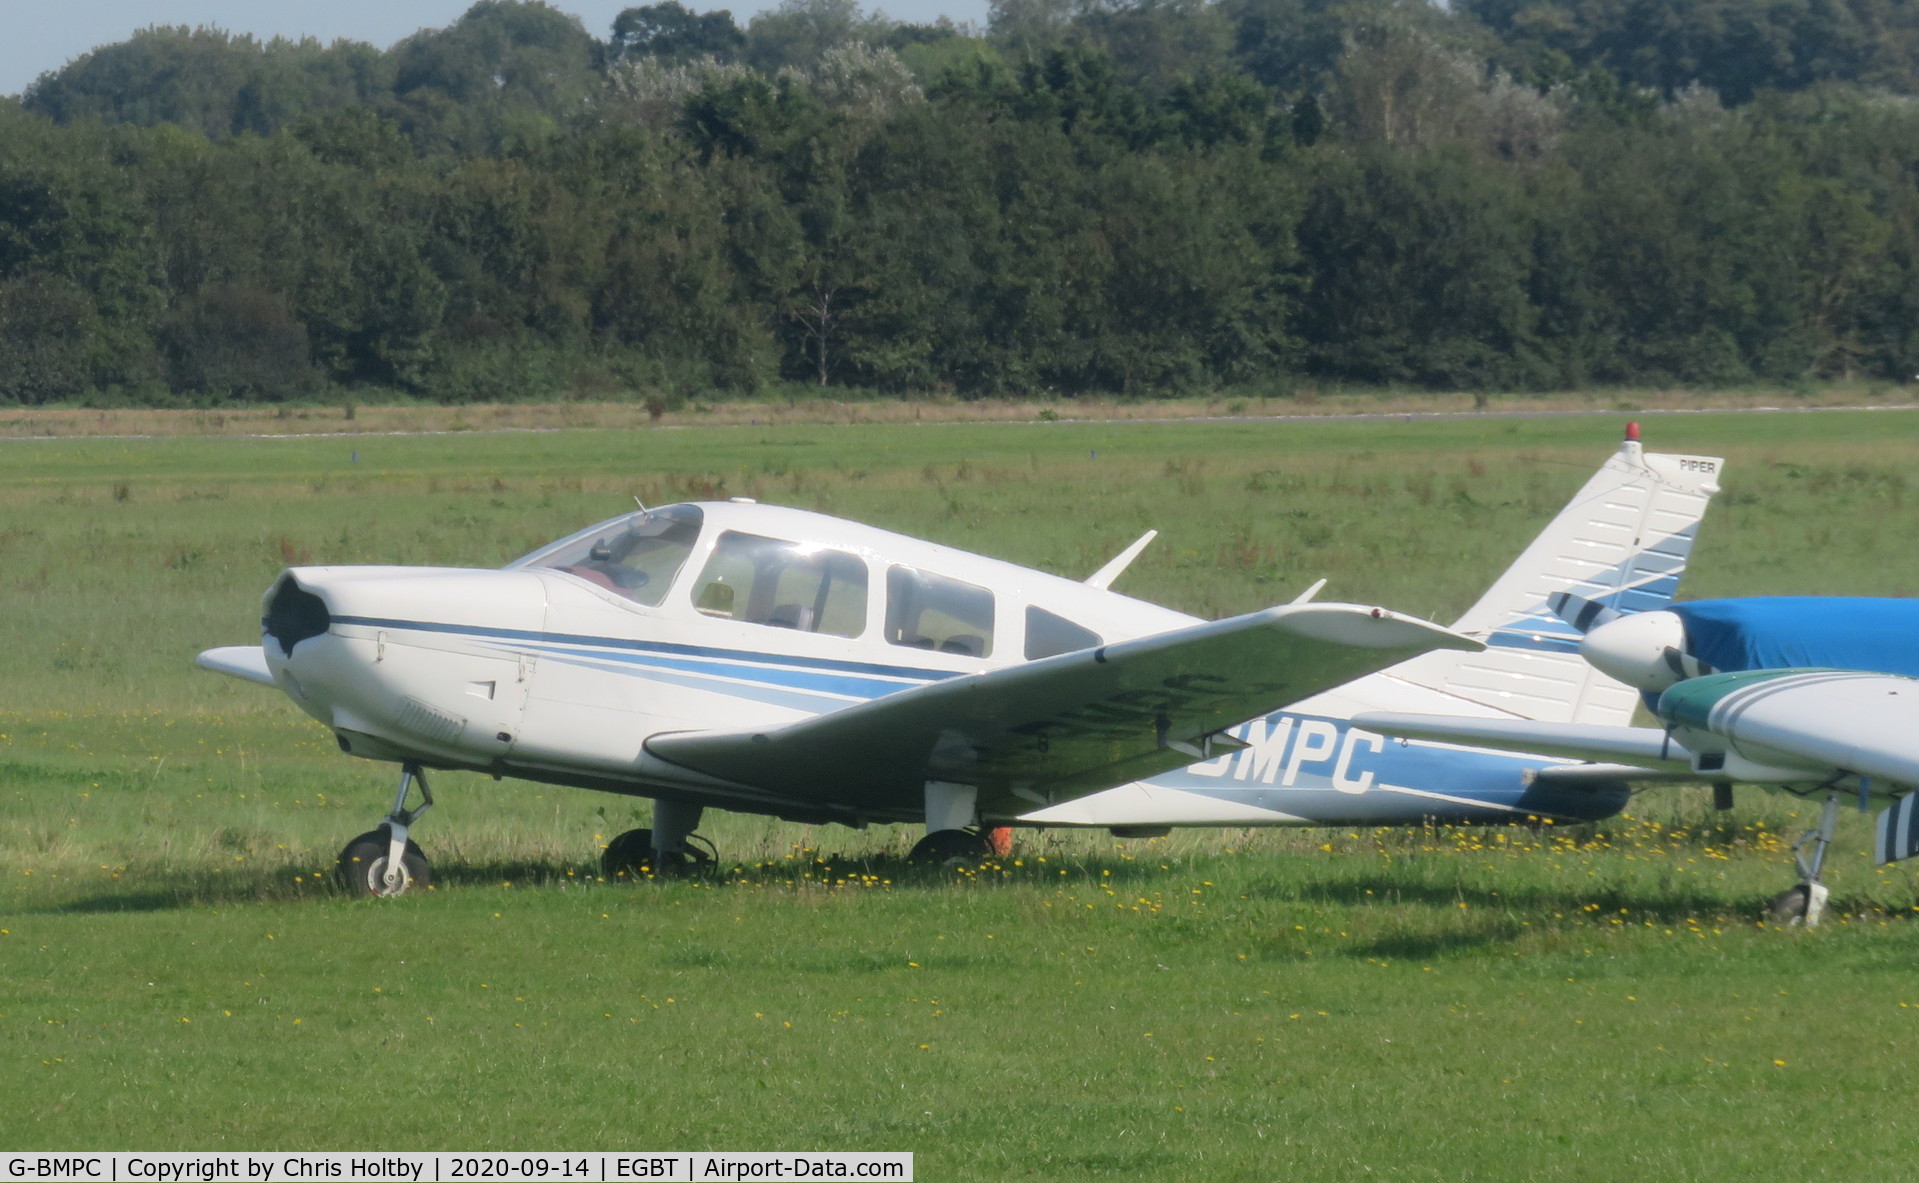 G-BMPC, 1977 Piper PA-28-181 Cherokee Archer II C/N 28-7790436, Parked without its prop and cowling at Turweston, Bucks